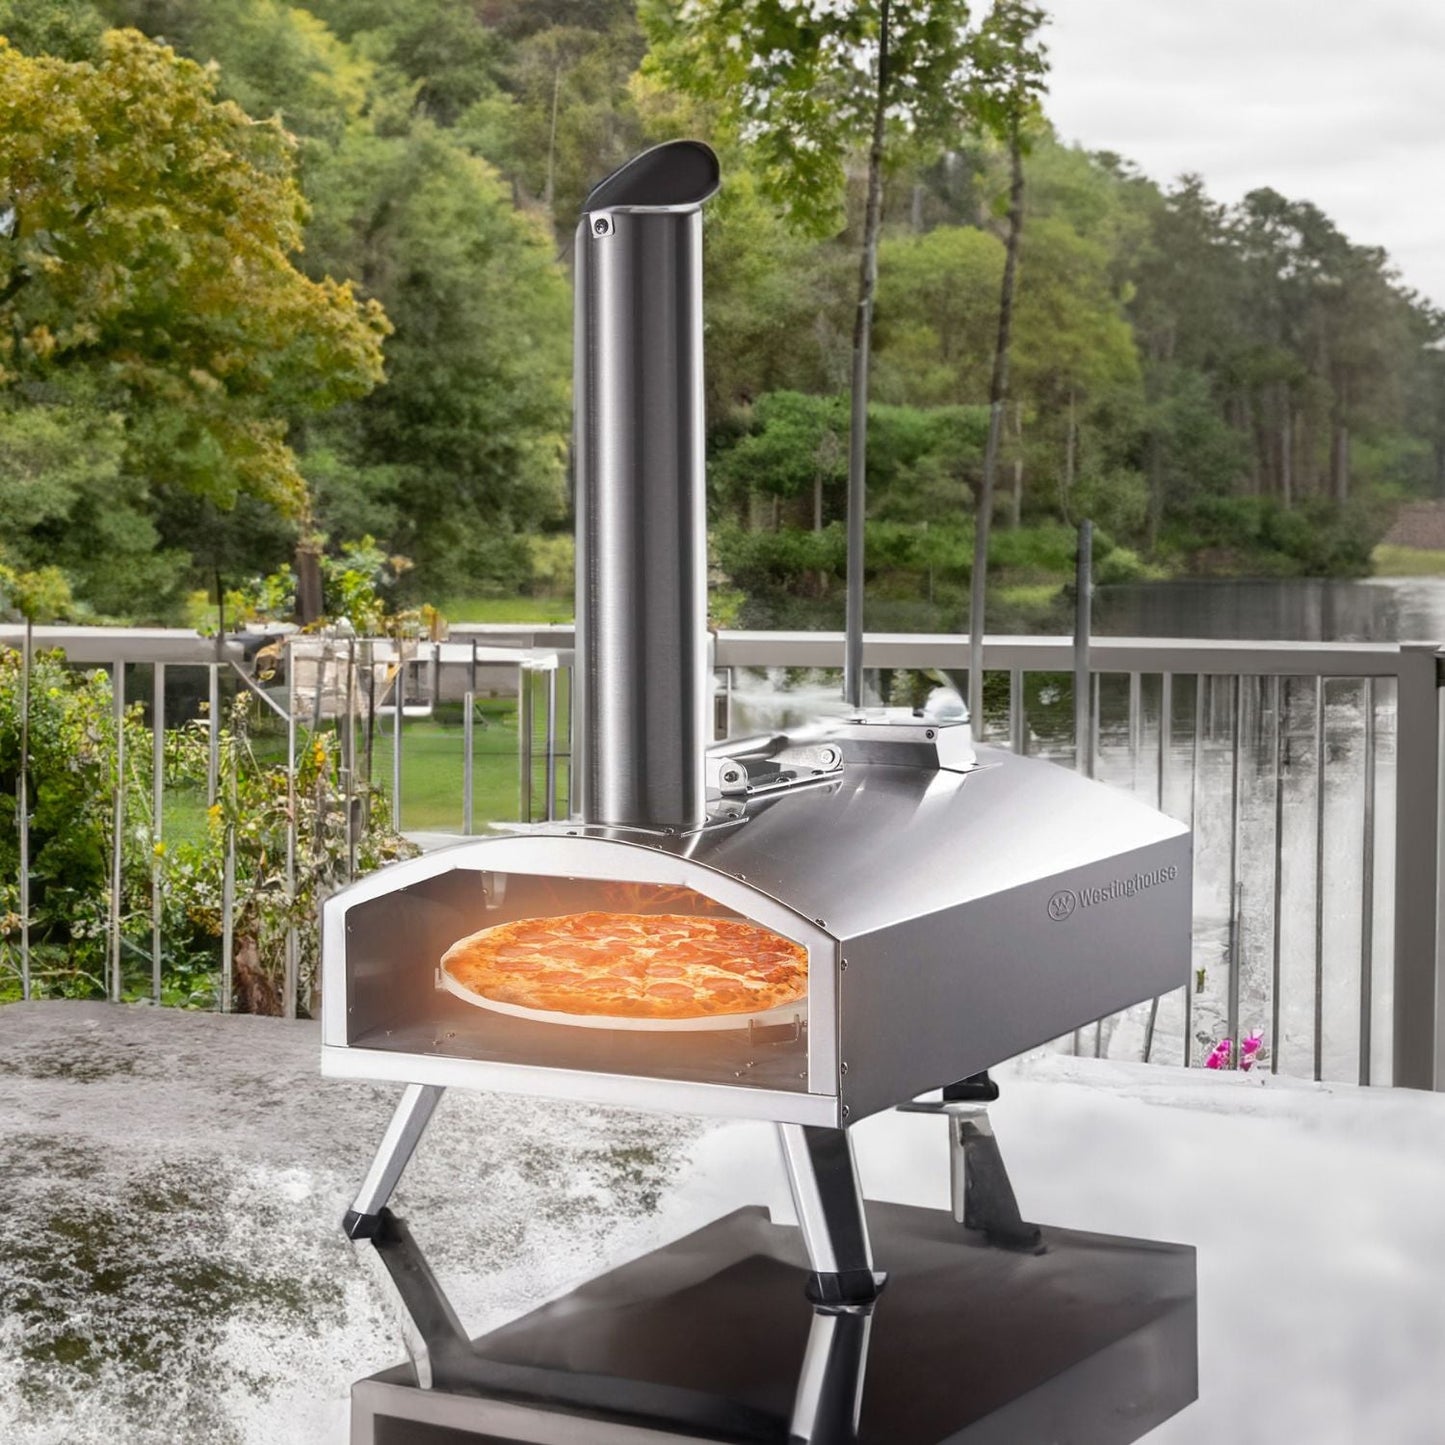 12" Dual Fuel Pizza Oven with Rotating Stone